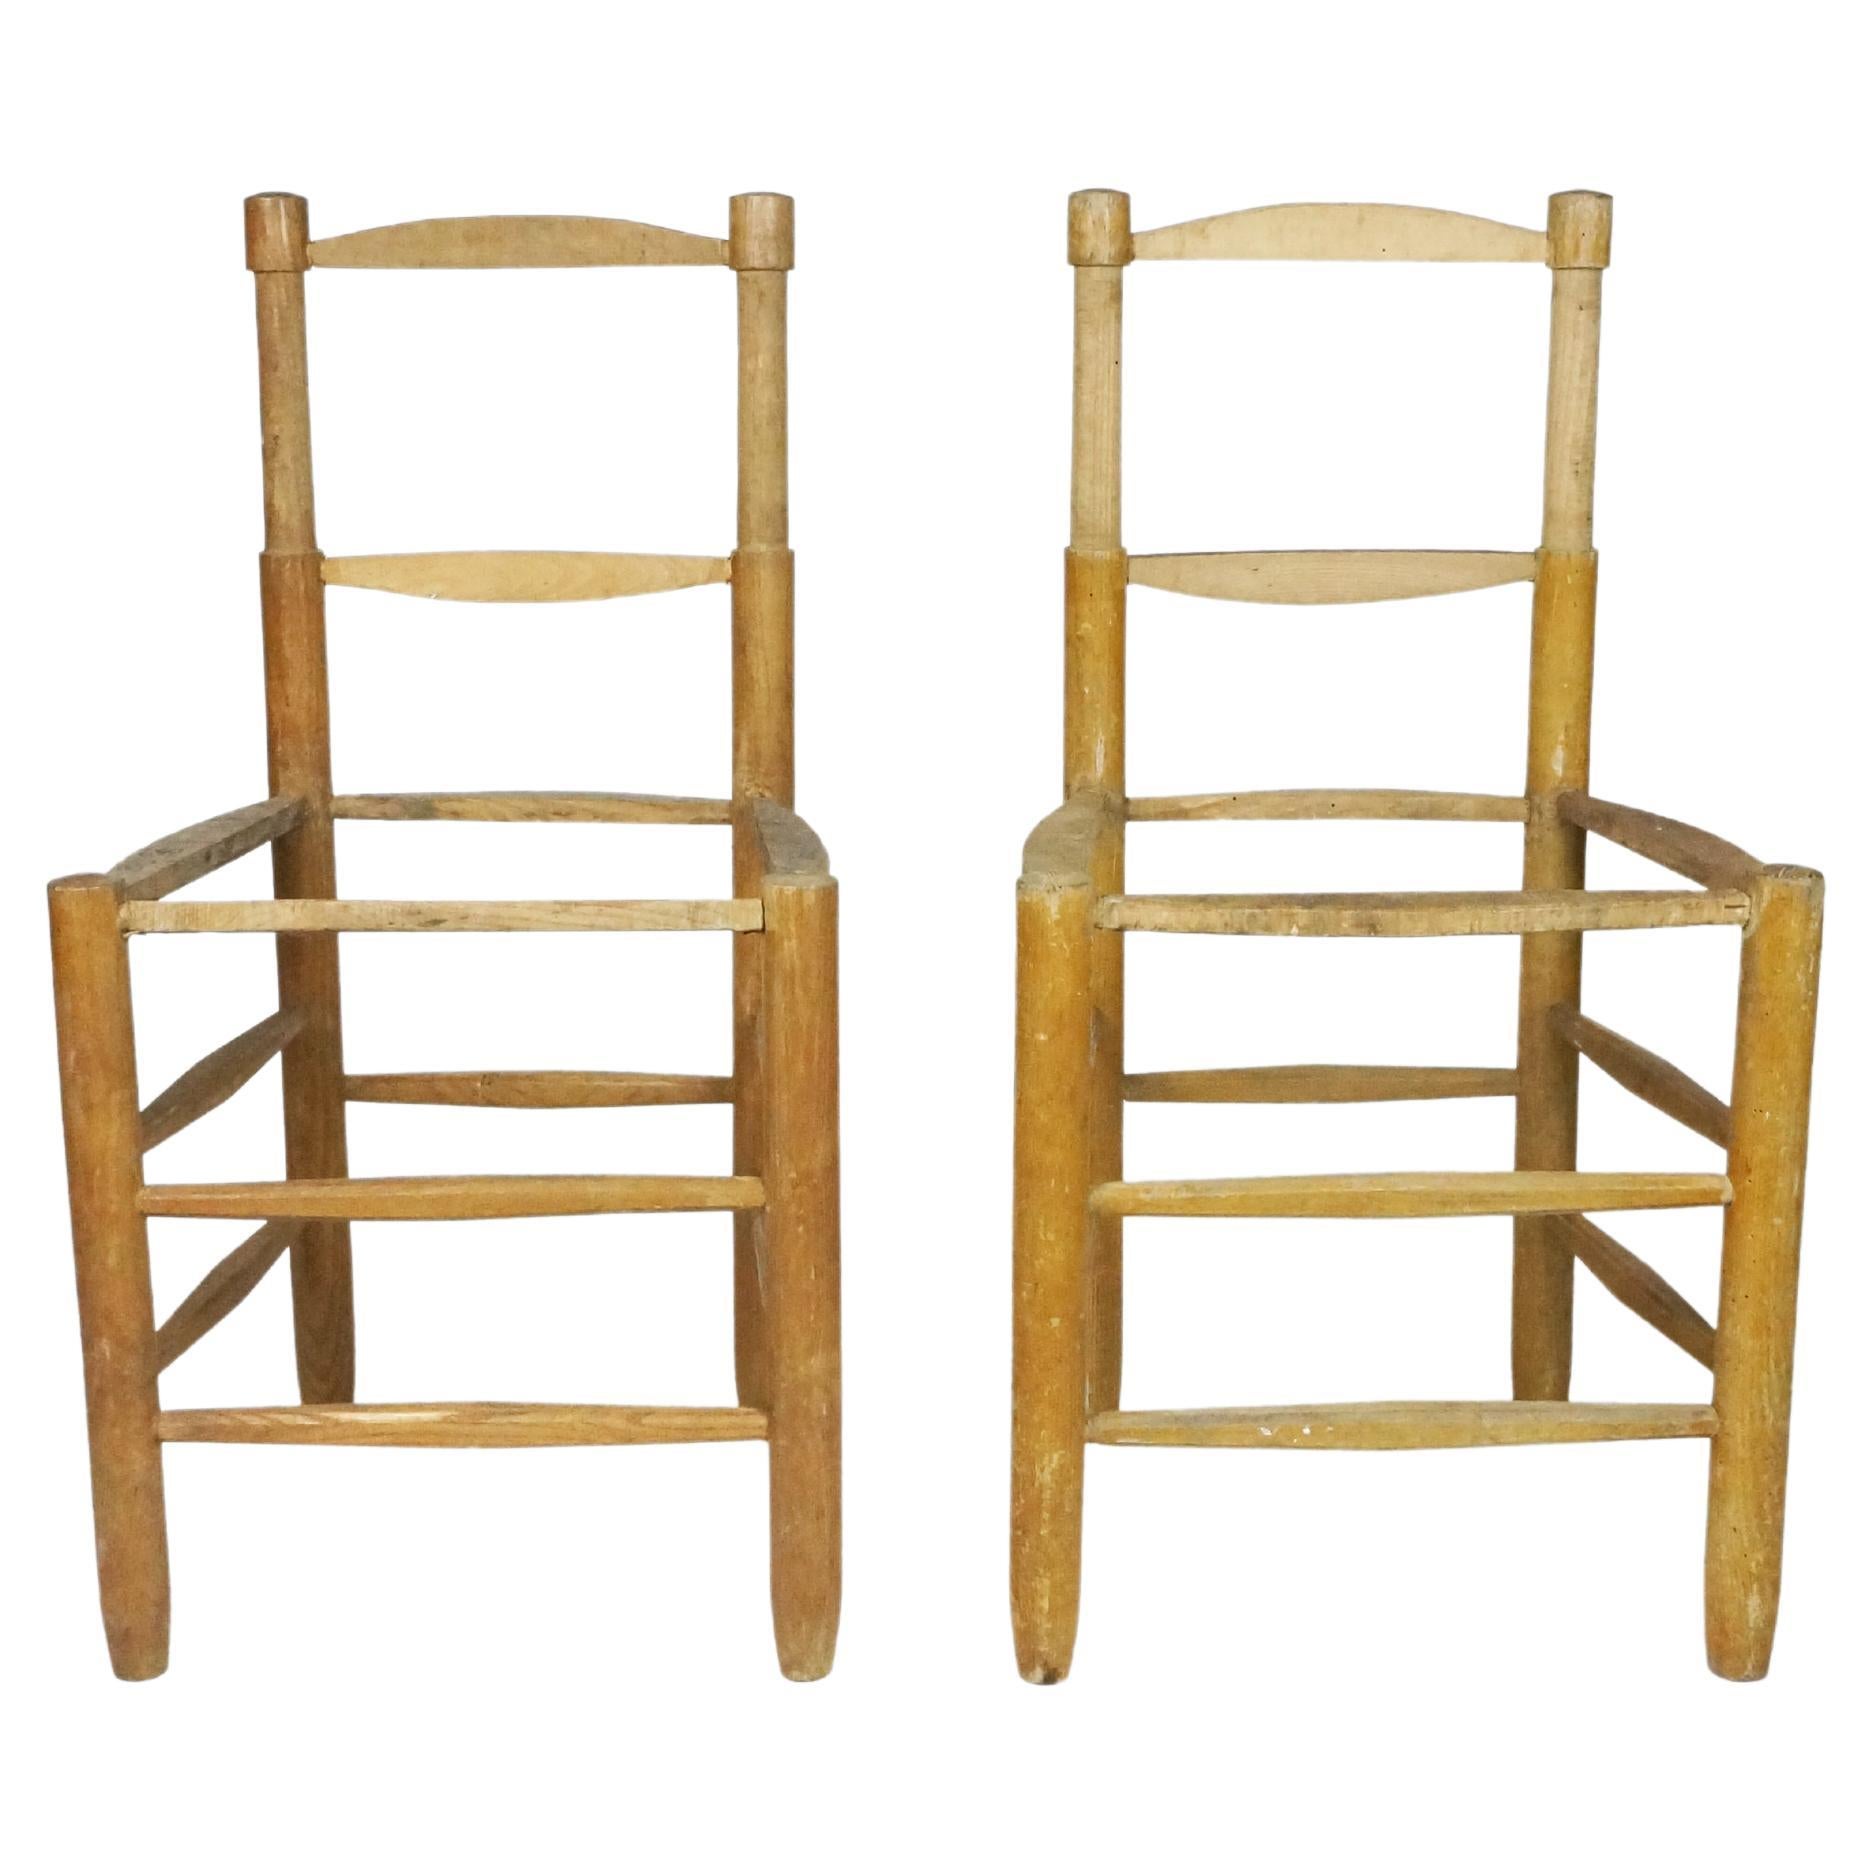 Original Pair of Charlotte Perriand Bauche Chairs n°18 For Sale